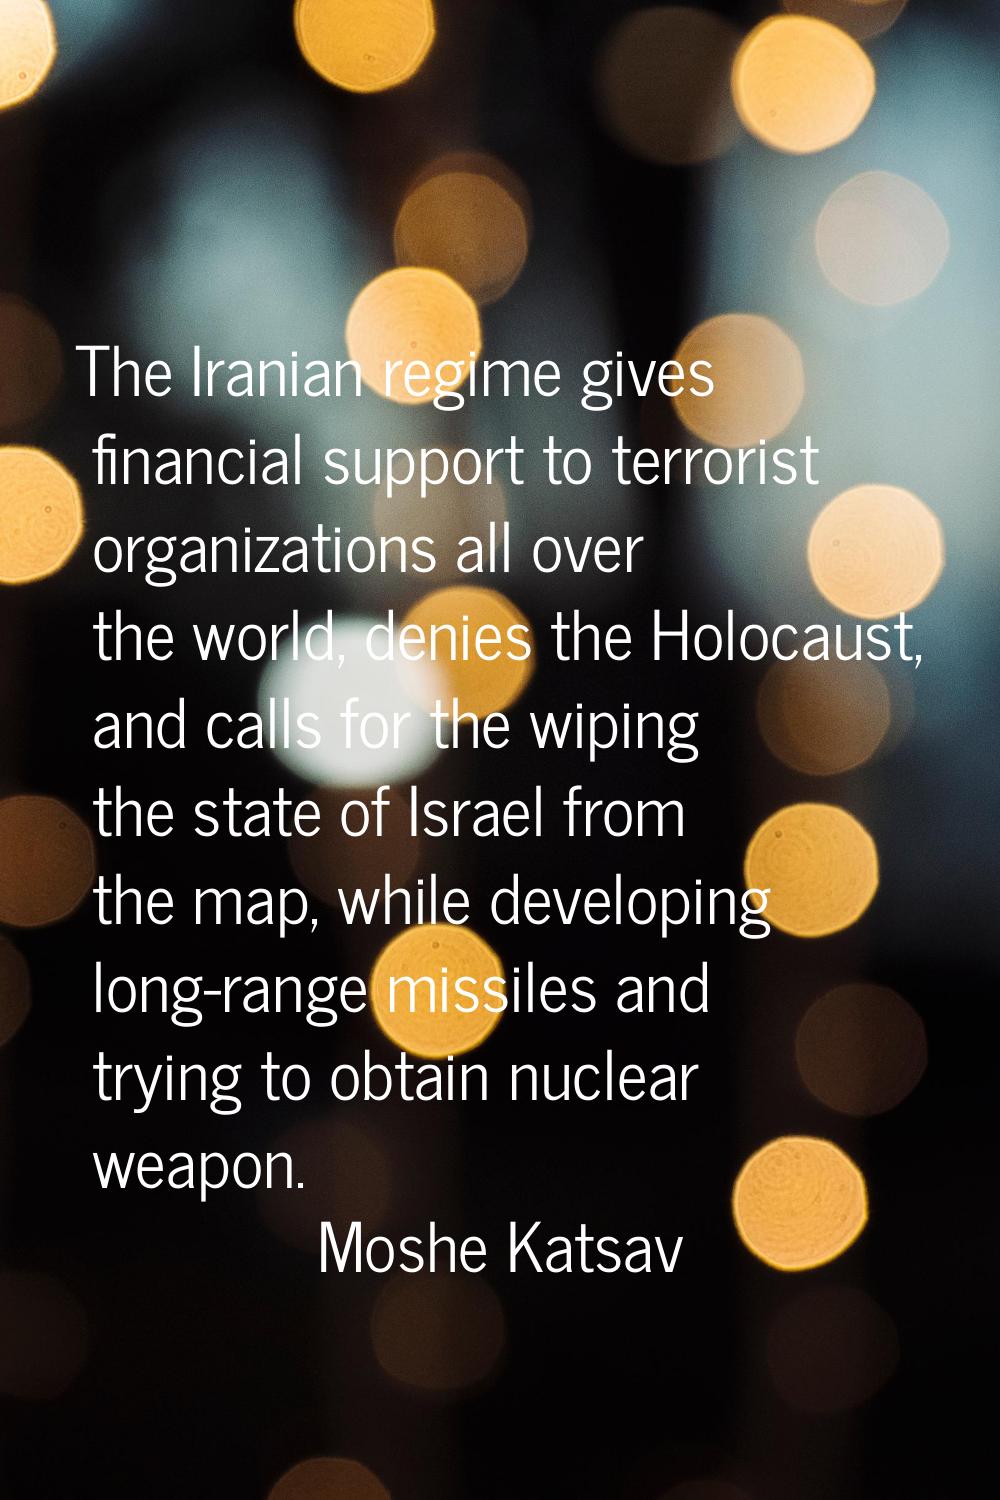 The Iranian regime gives financial support to terrorist organizations all over the world, denies th